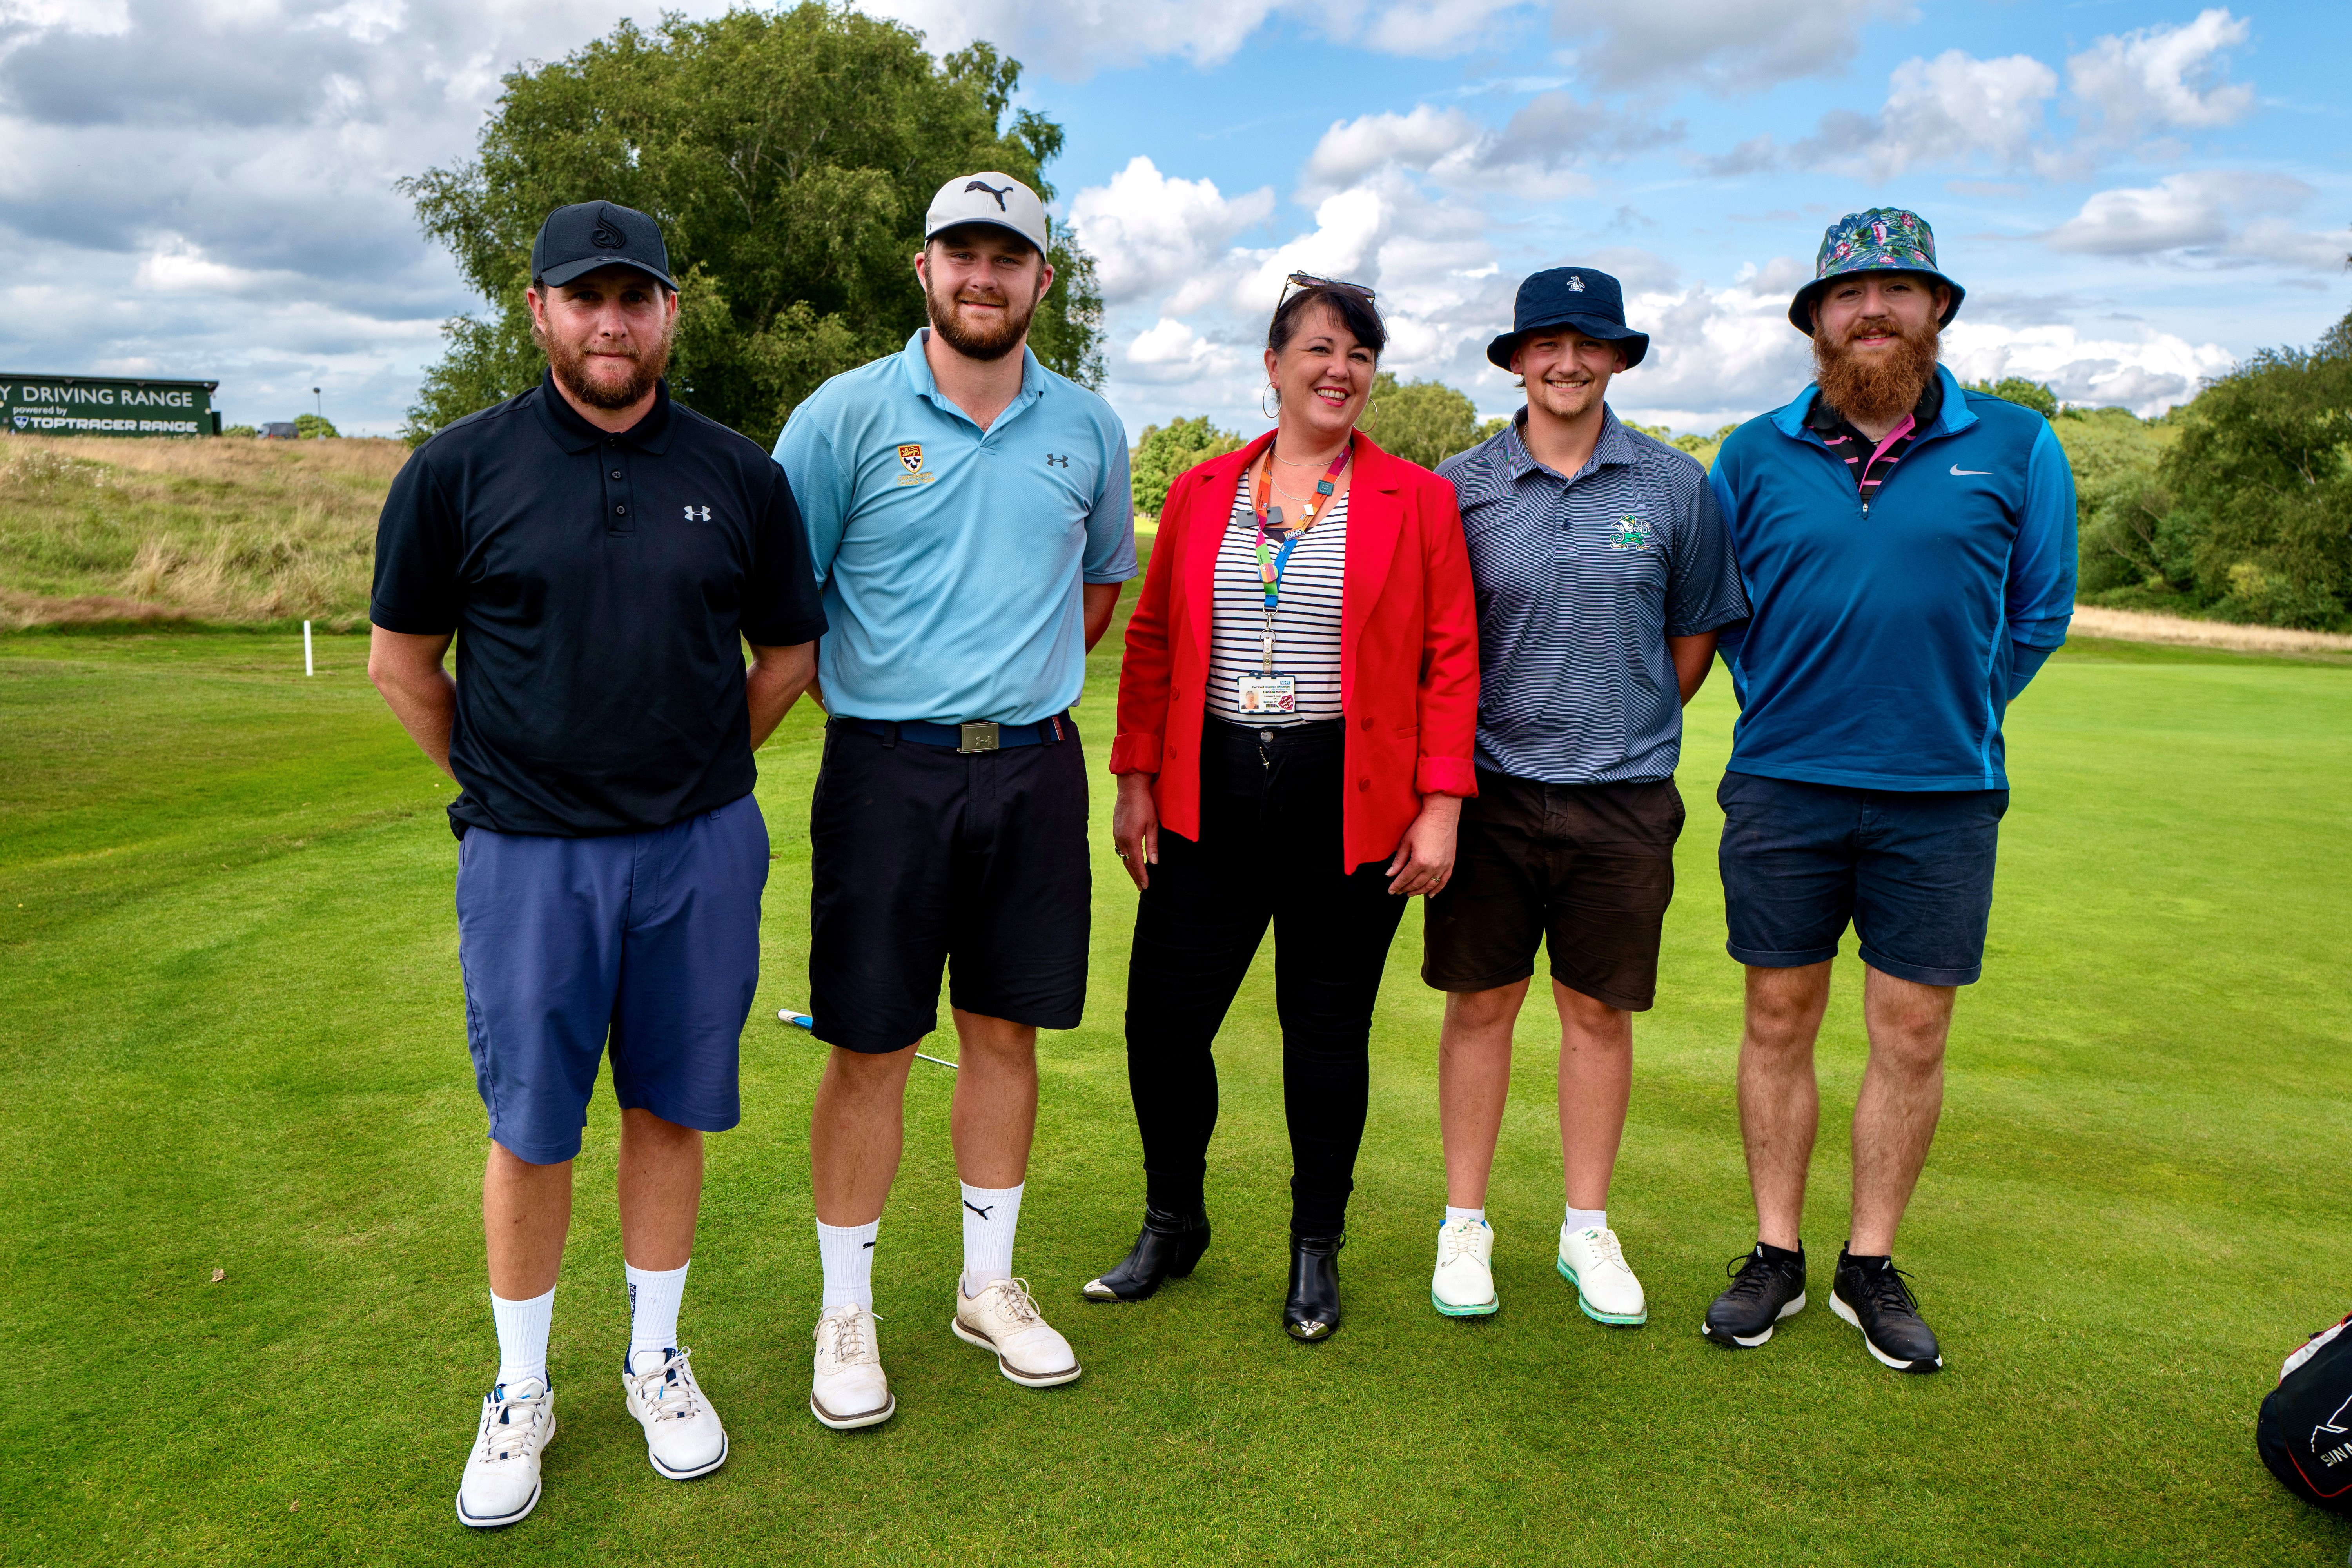 Kai Appleby, Max Rutherford, Alex Beck and Ben Rutherford with Dee Neligan from East Kent Hospitals charity. They are pictured on a golf course, the golfers are wearing hats and shorts.